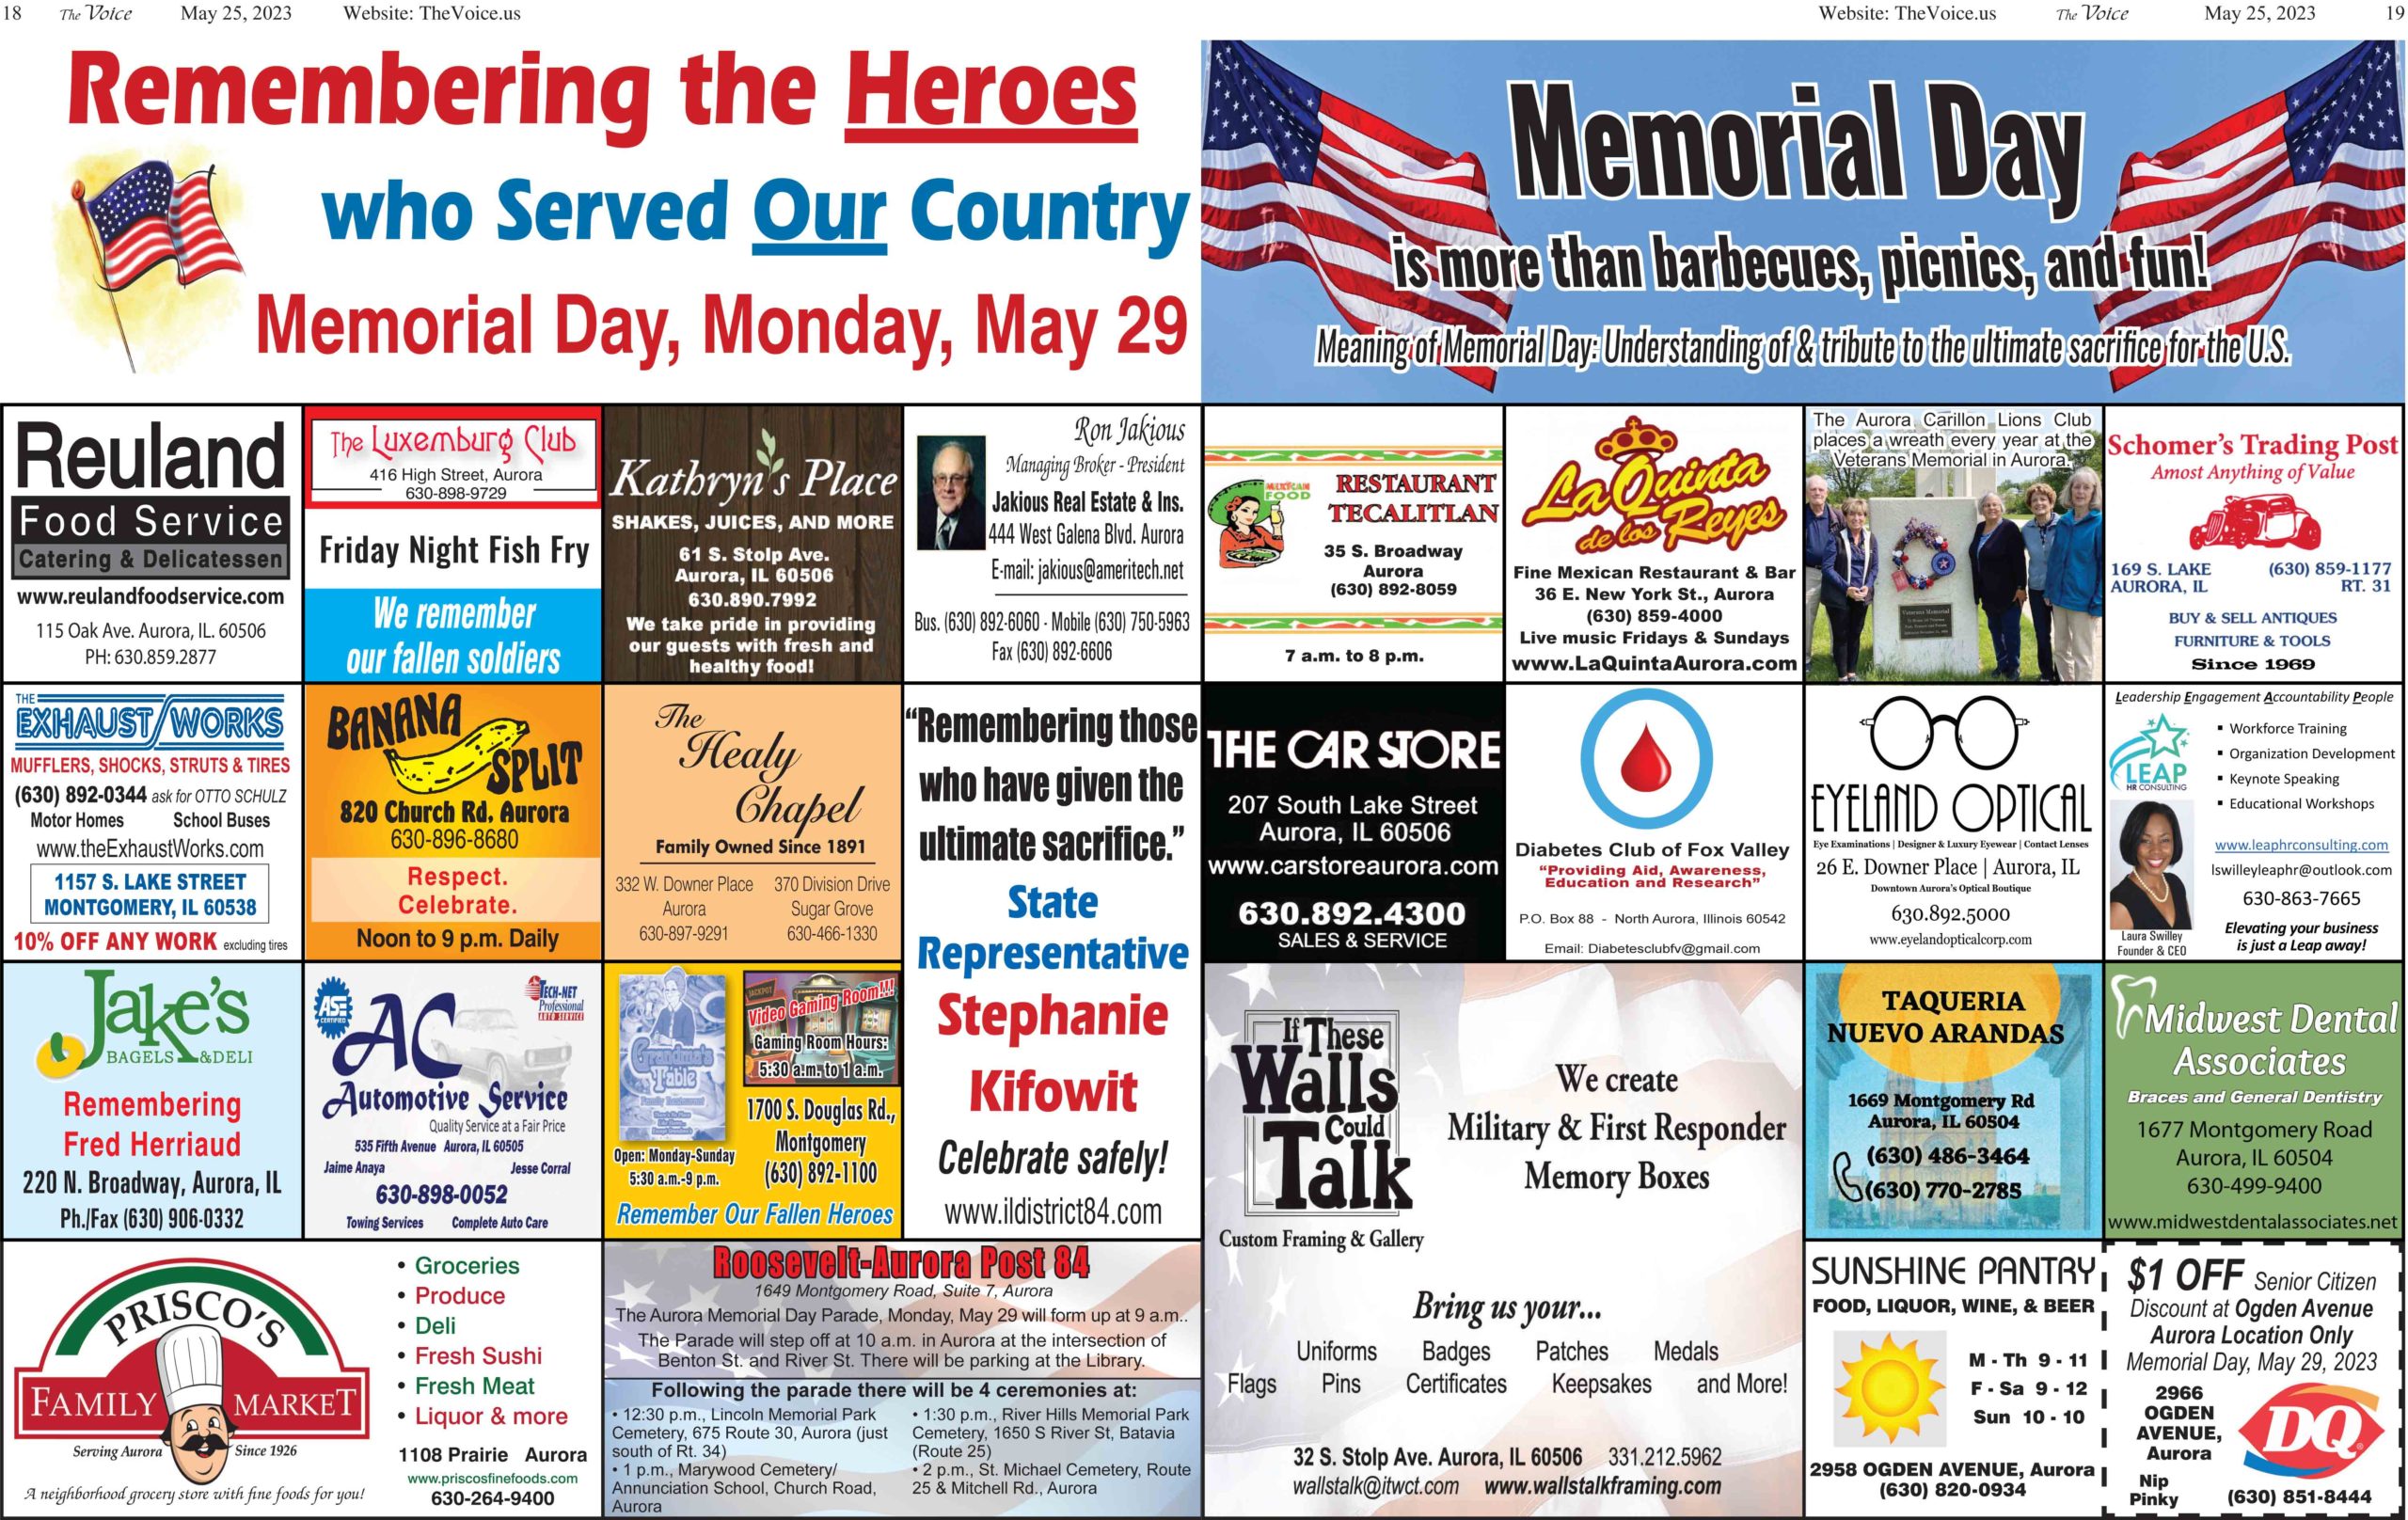 Remembering the Heros who served our country, Memorial Day, Monday, May 29, 2023. Memorial Day is more than barbecues, picnics, and fun! Meaning of Memorial Day: Understanding of and tribute to the ultimate sacrifice for the U.S.